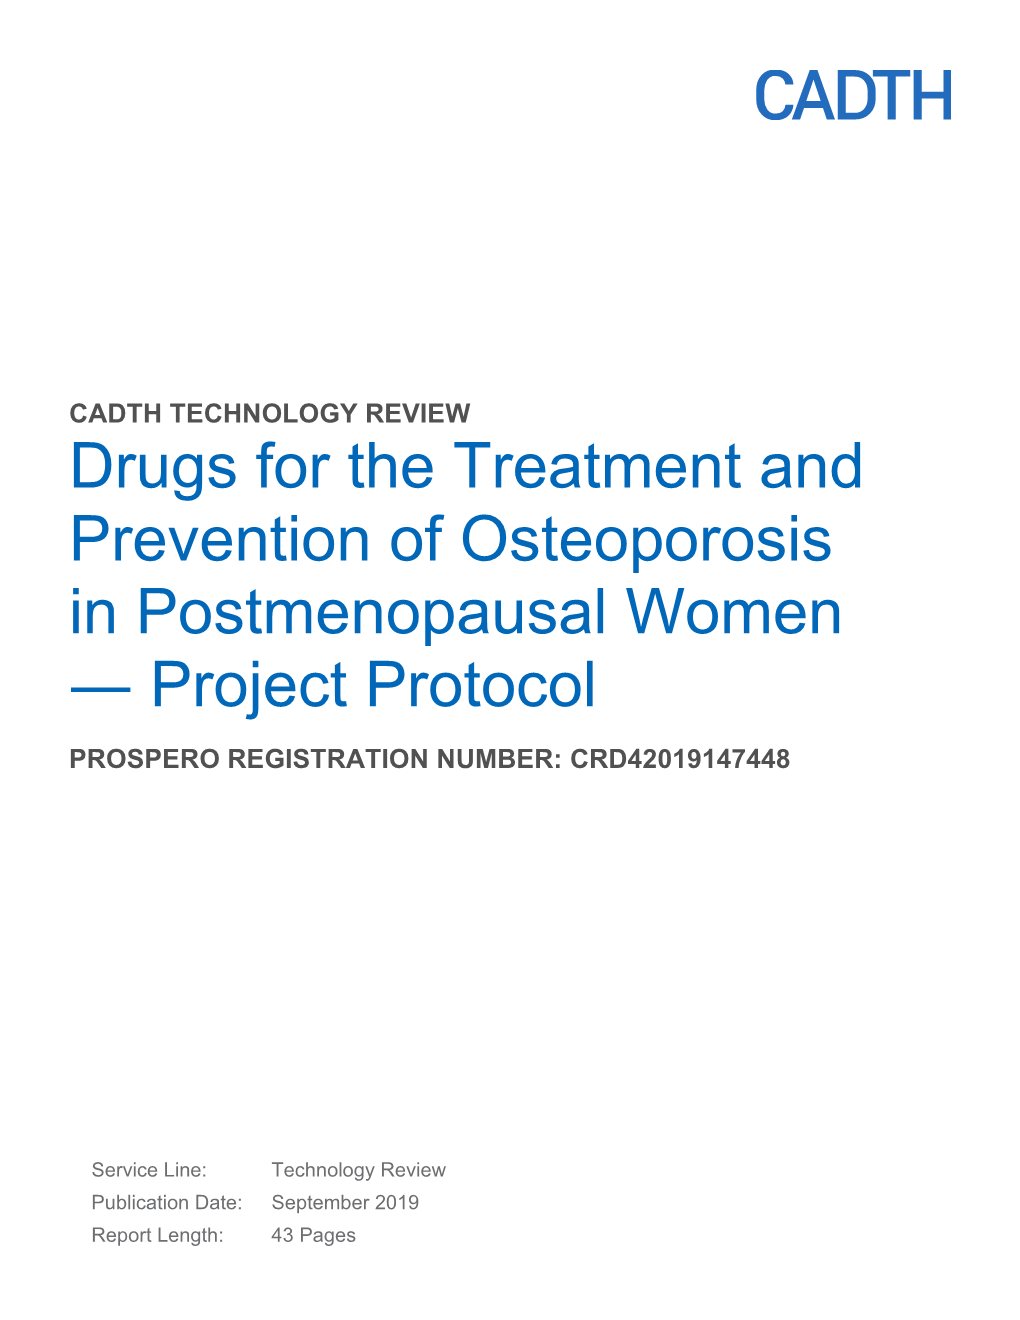 Drugs for the Treatment and Prevention of Osteoporosis in Postmenopausal Women ― Project Protocol